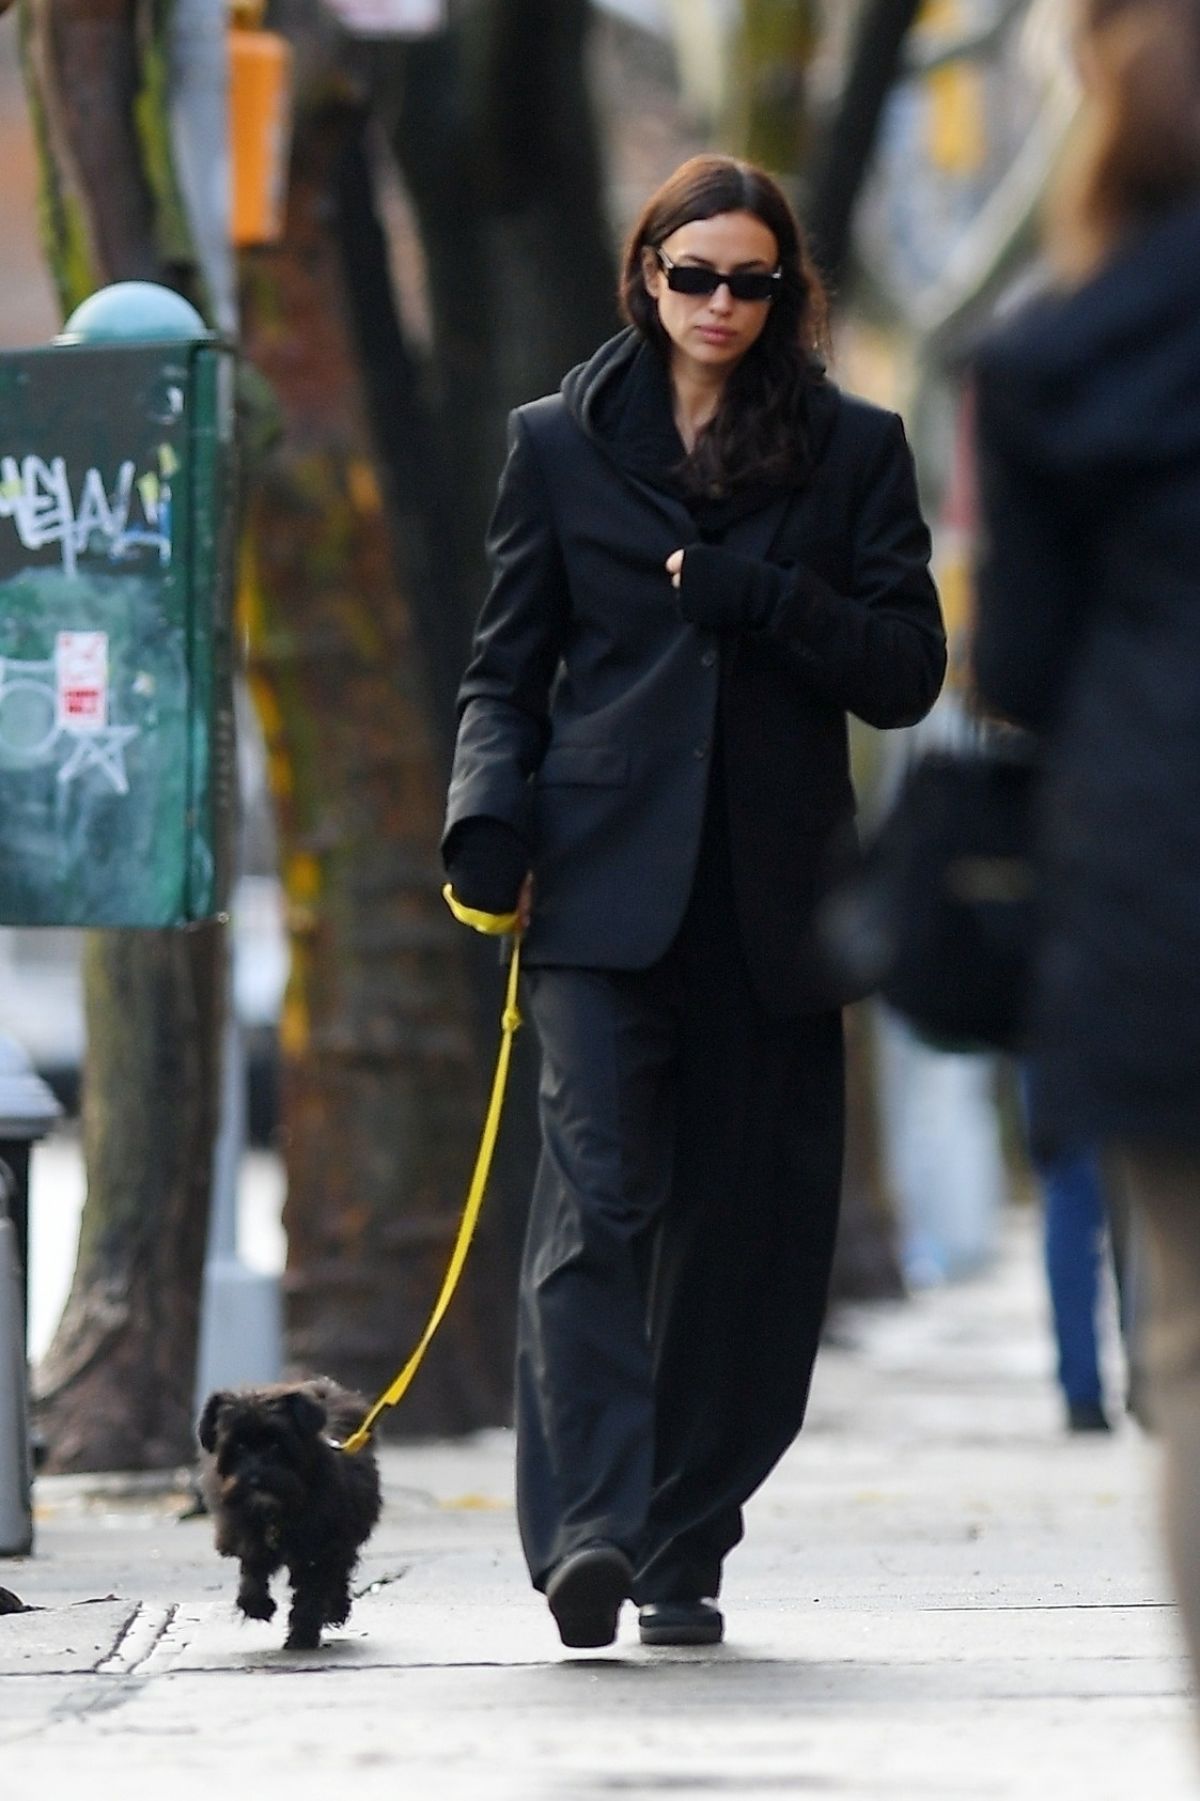 Irina Shayk in Stylish Black Suit Pant Outfit Strolling with Dog in NYC 1